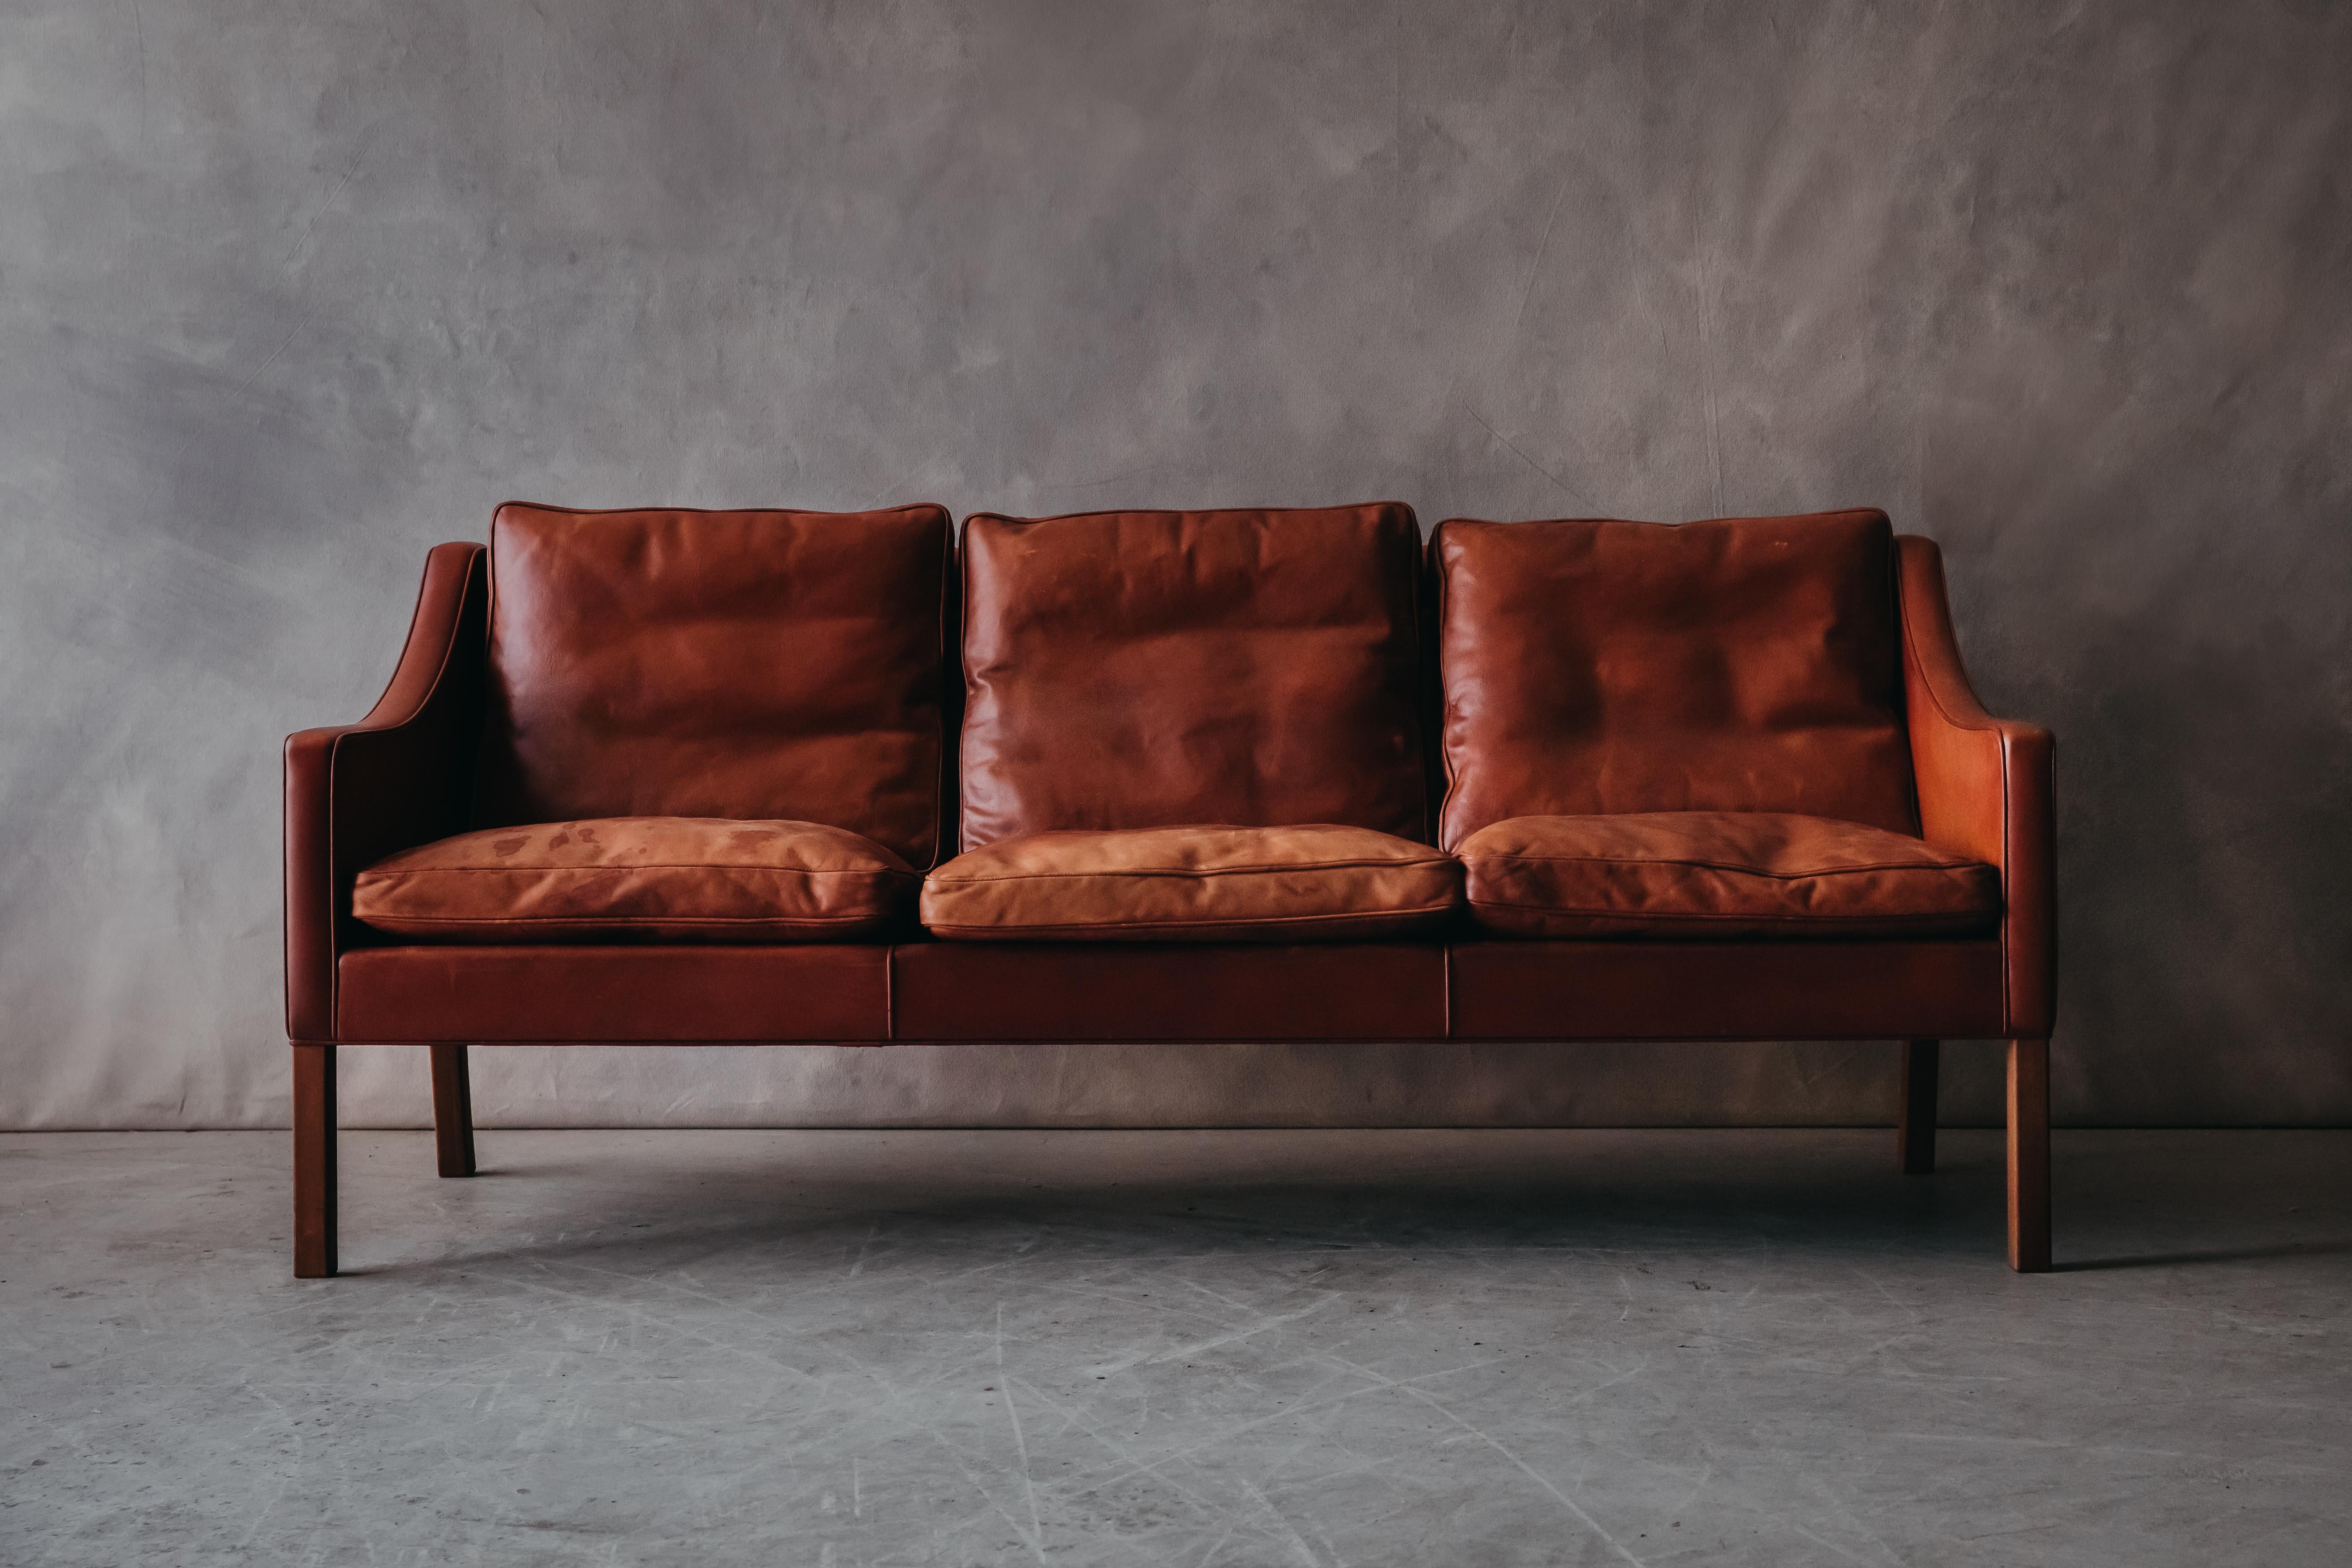 Vintage Borge Mogensen Sofa, Model 2209, from Denmark, circa 1980. Original cognac leather with an amazing patina and wear. Very comfortable.